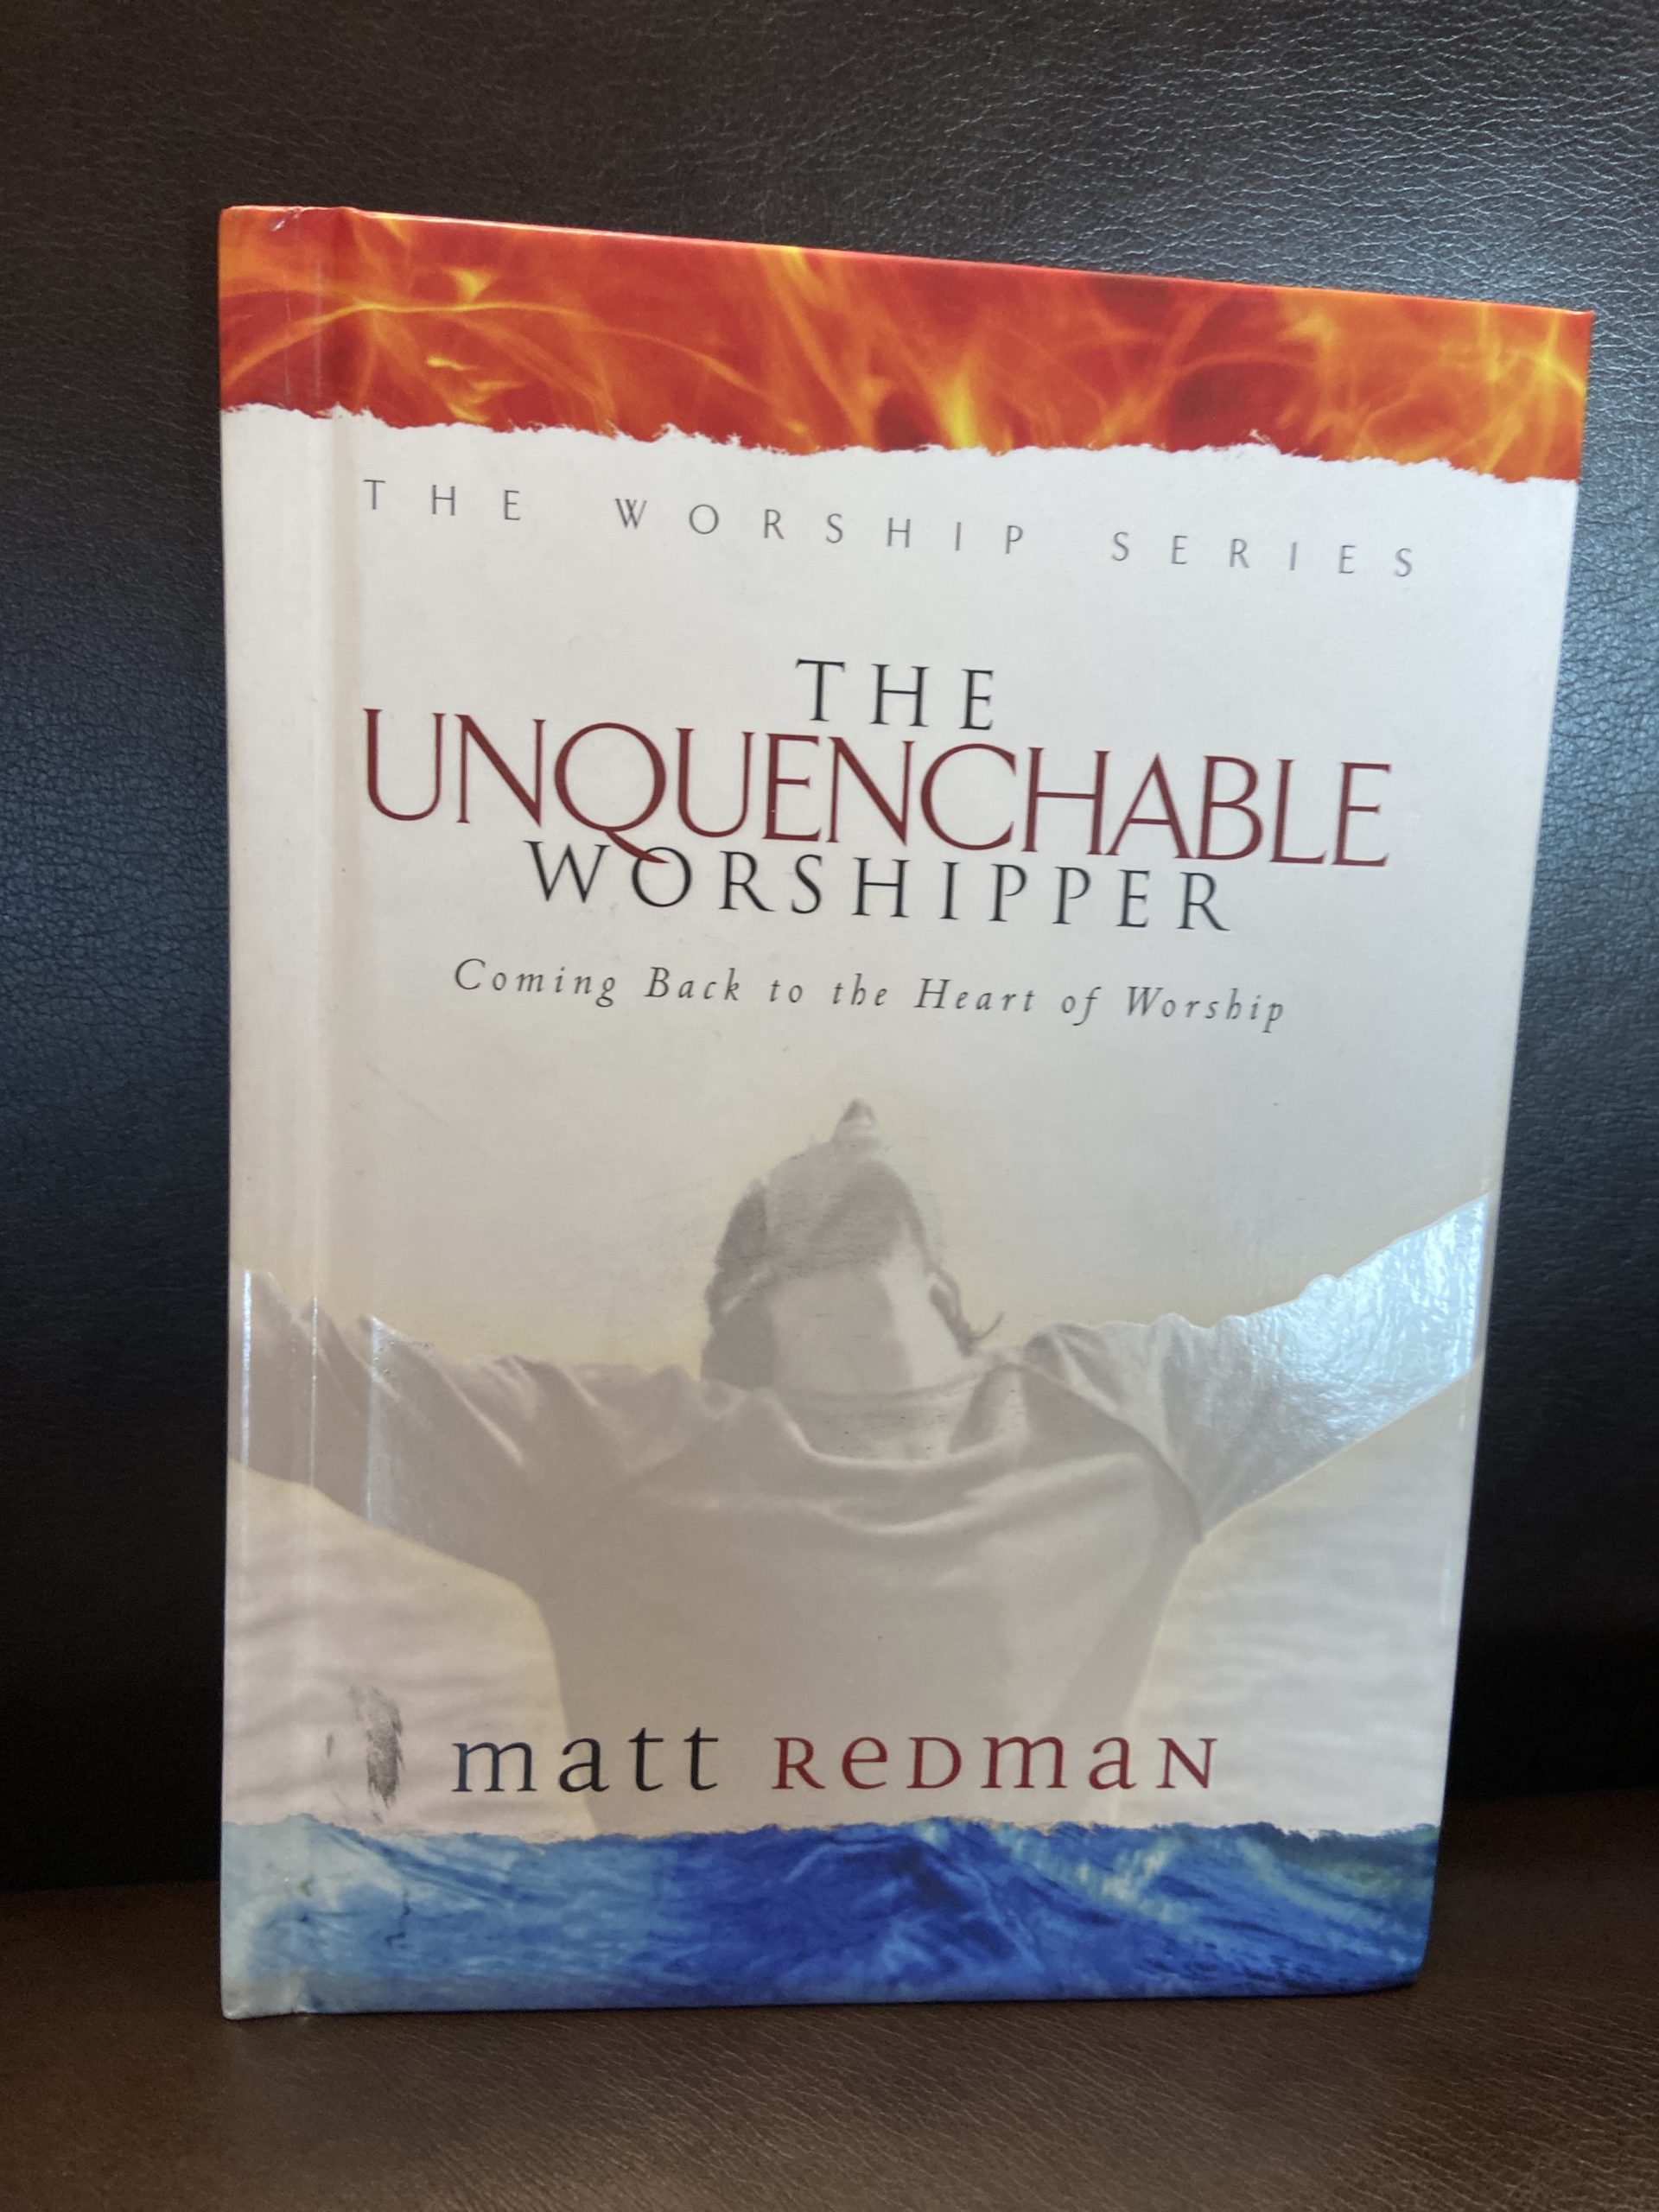 The unquenchable worshipper ebook torrents